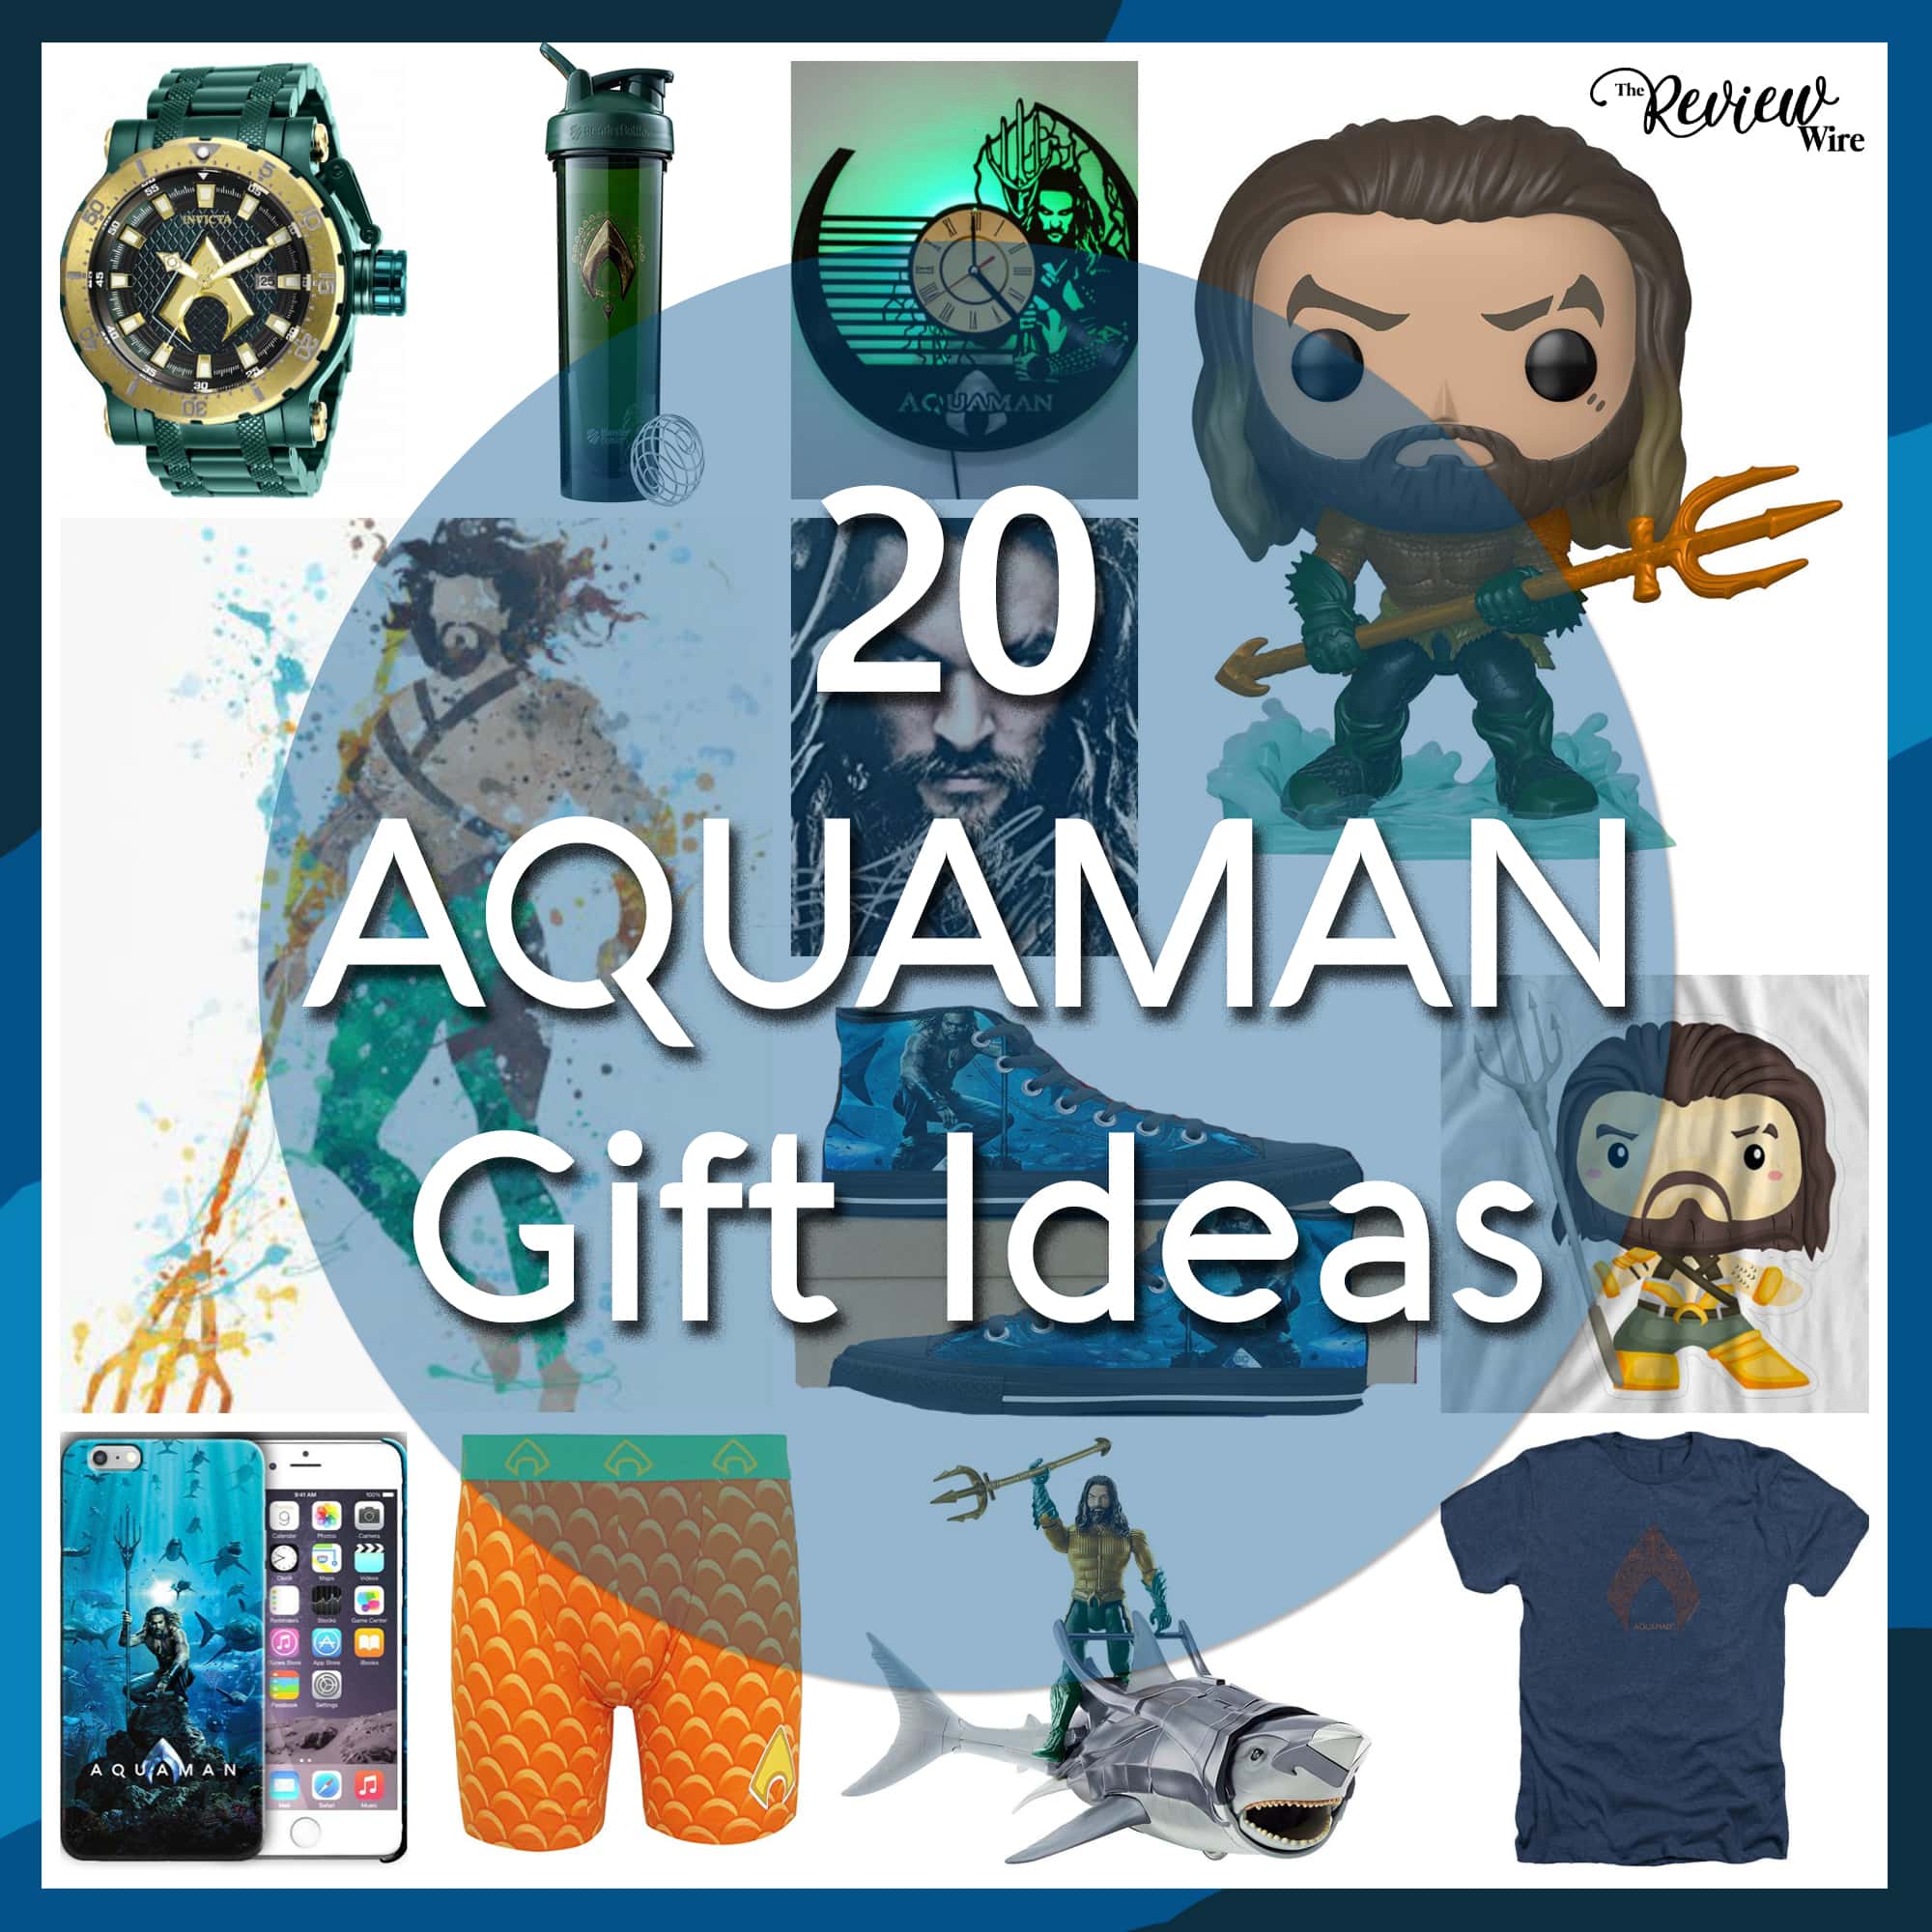 The Review Wire: 20 Aquaman Gift Ideas